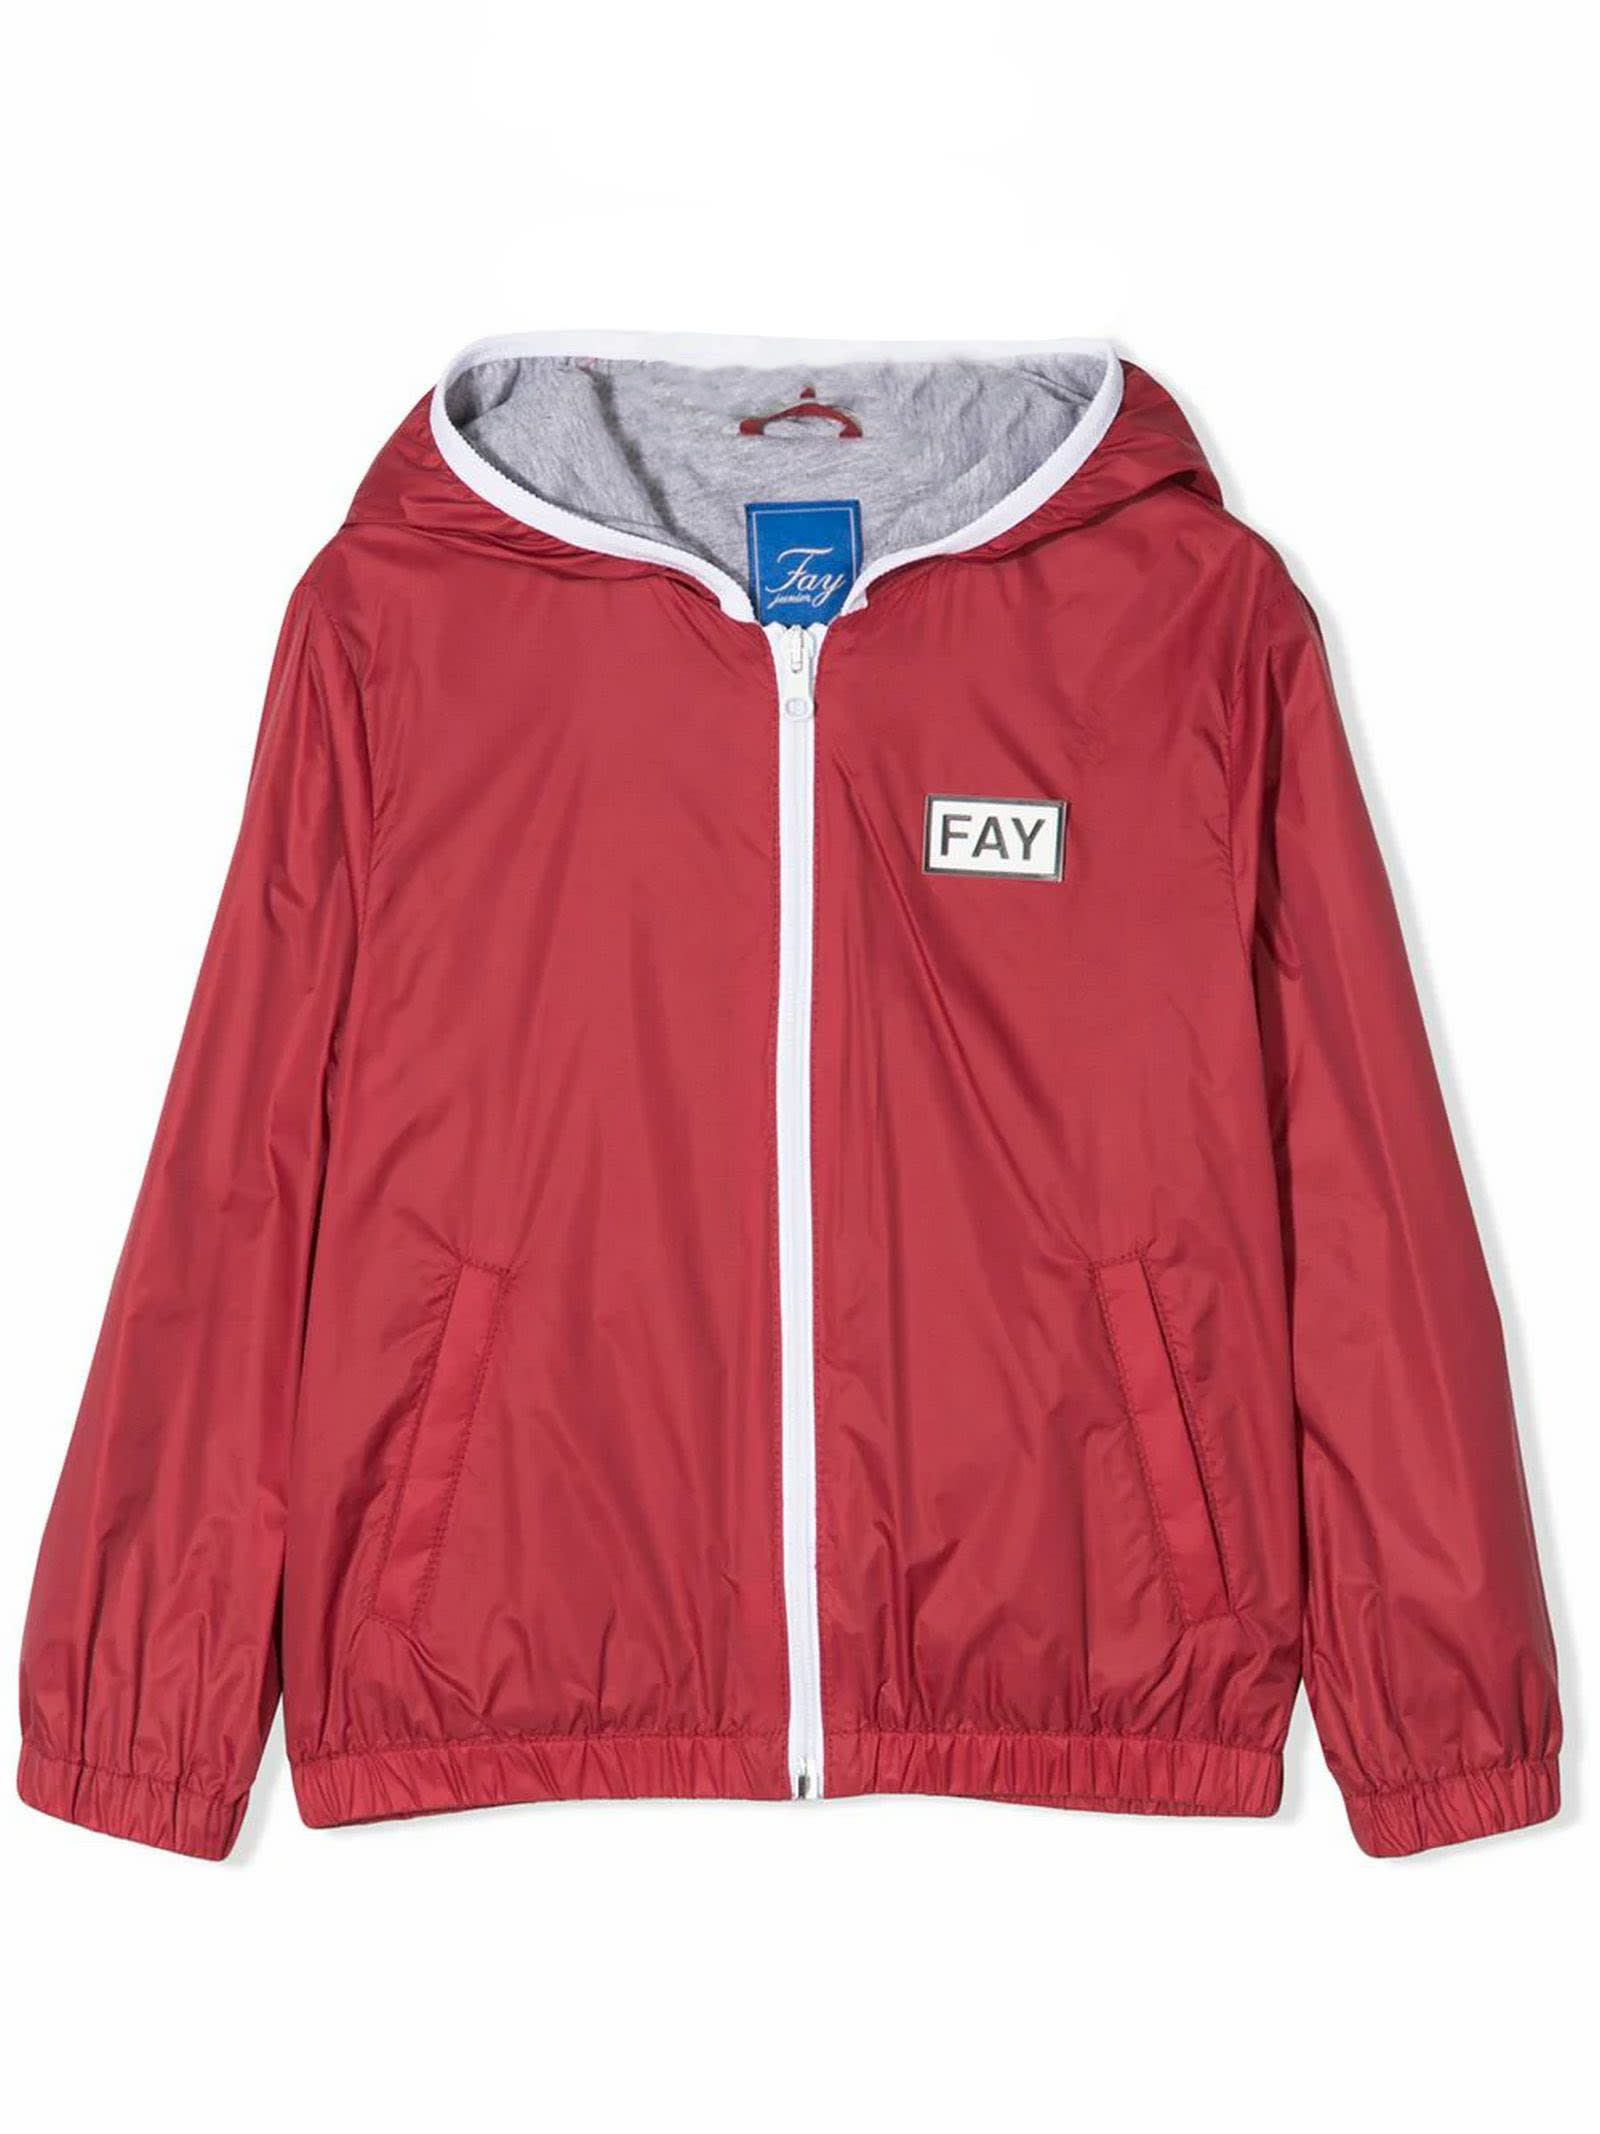 FAY RED HOODED JACKET,5M2097MC640T 409